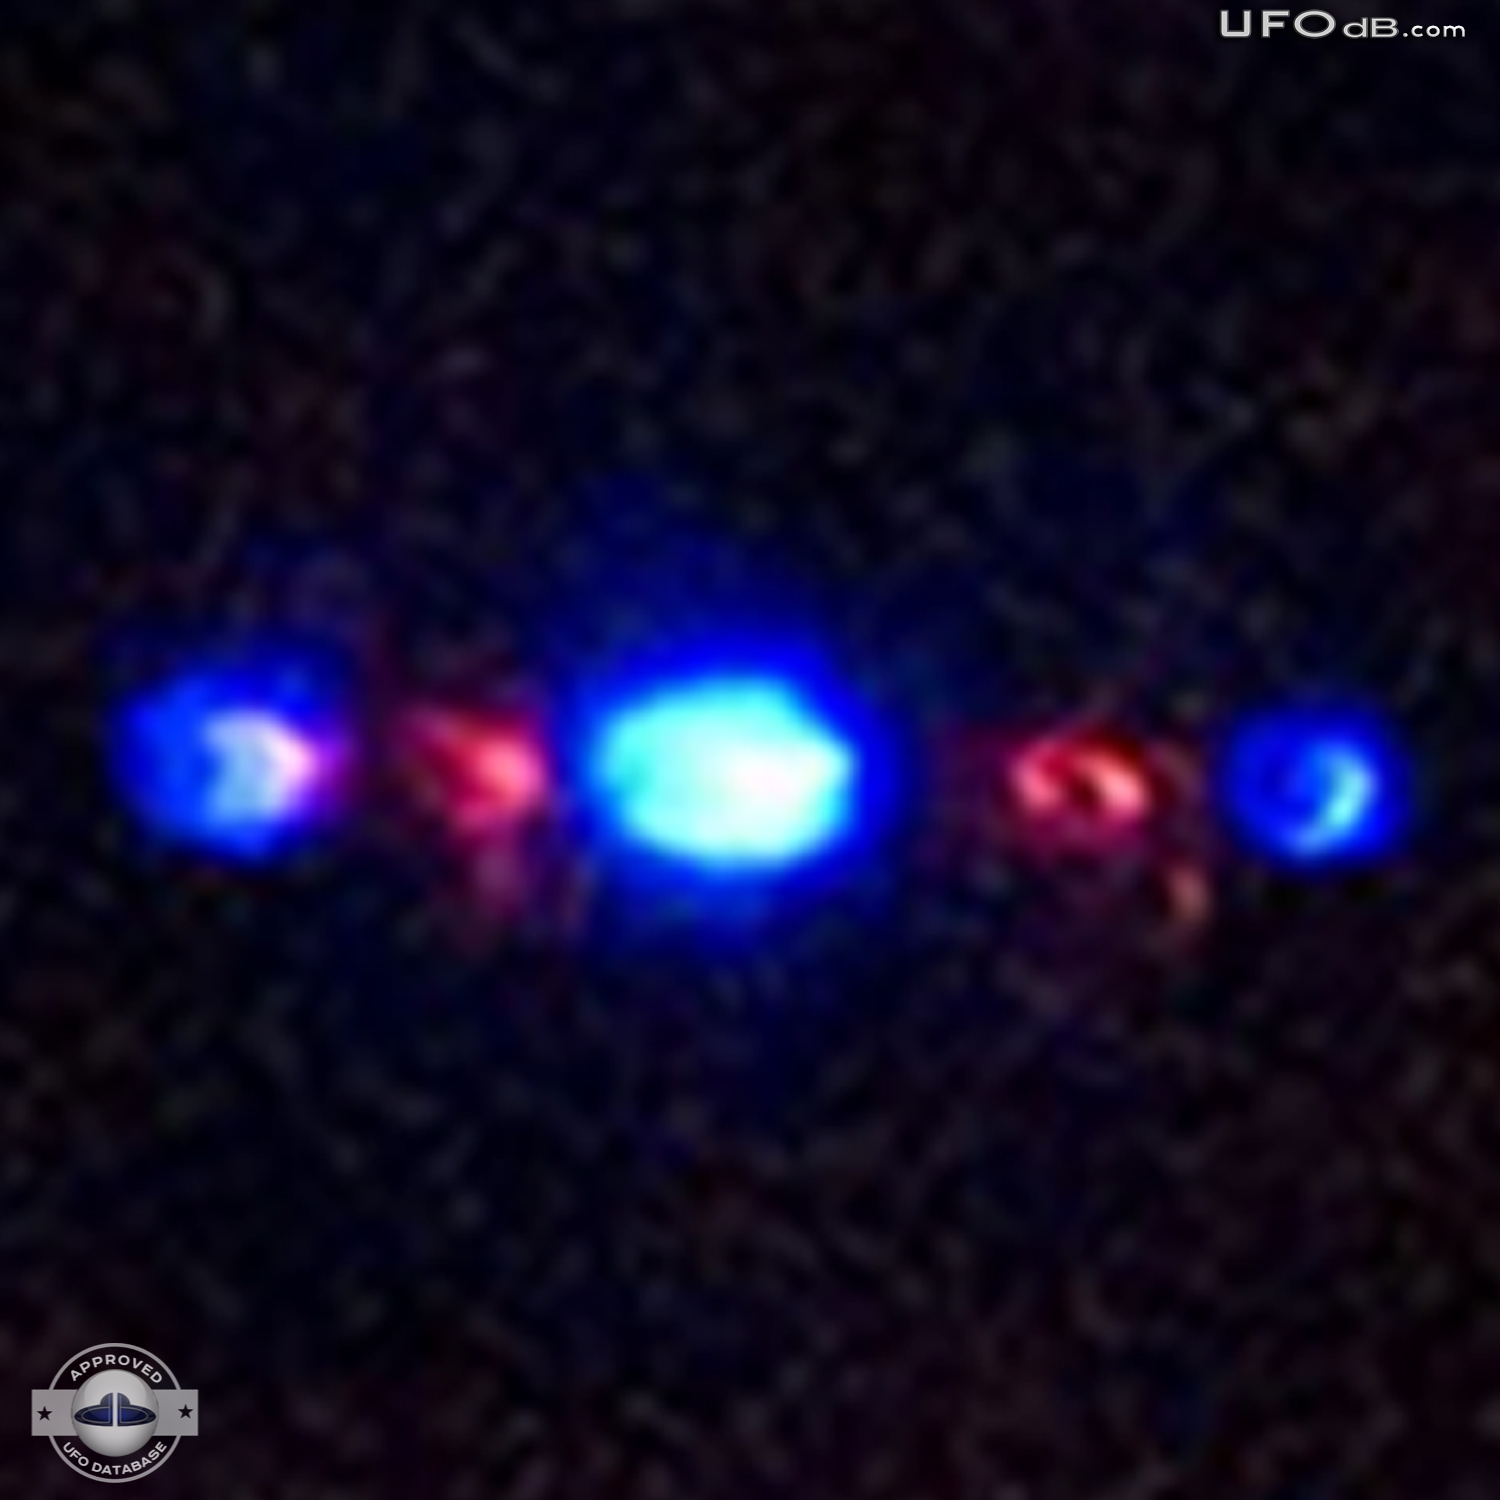 People from Manitoba witnesses a UFO landing on their fields June 2011 UFO Picture #355-6